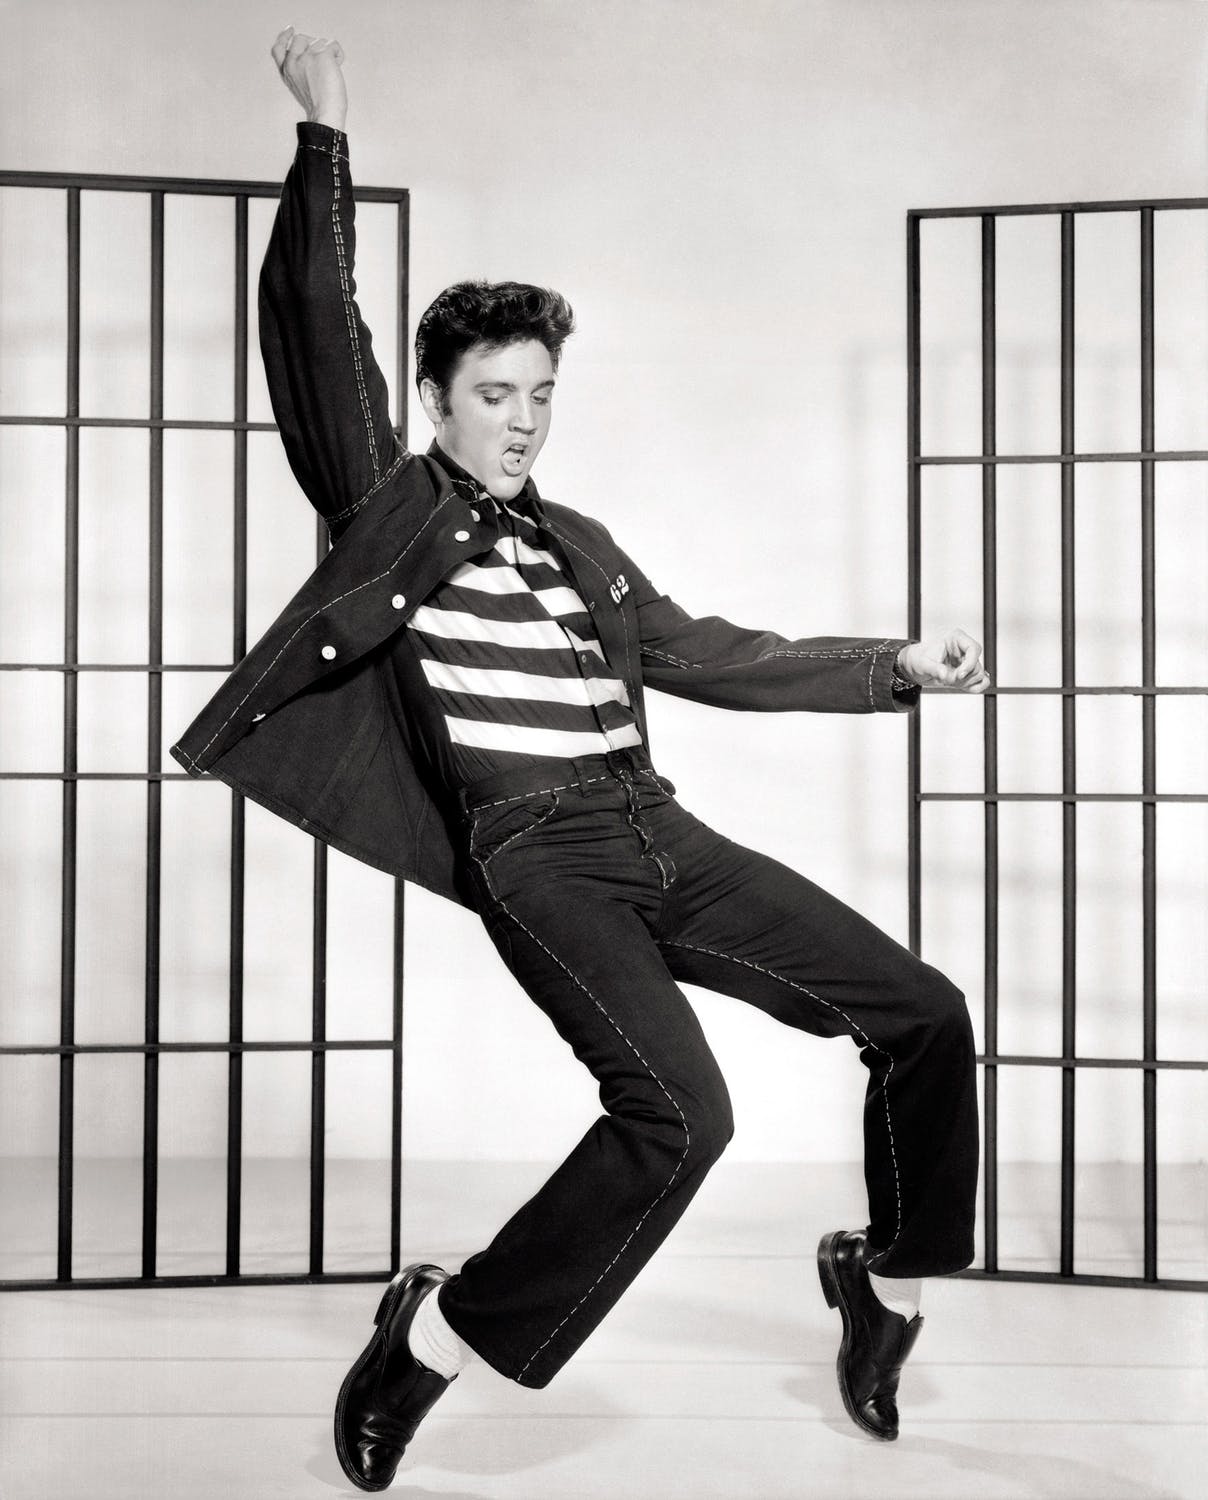 facts about Elvis Presley